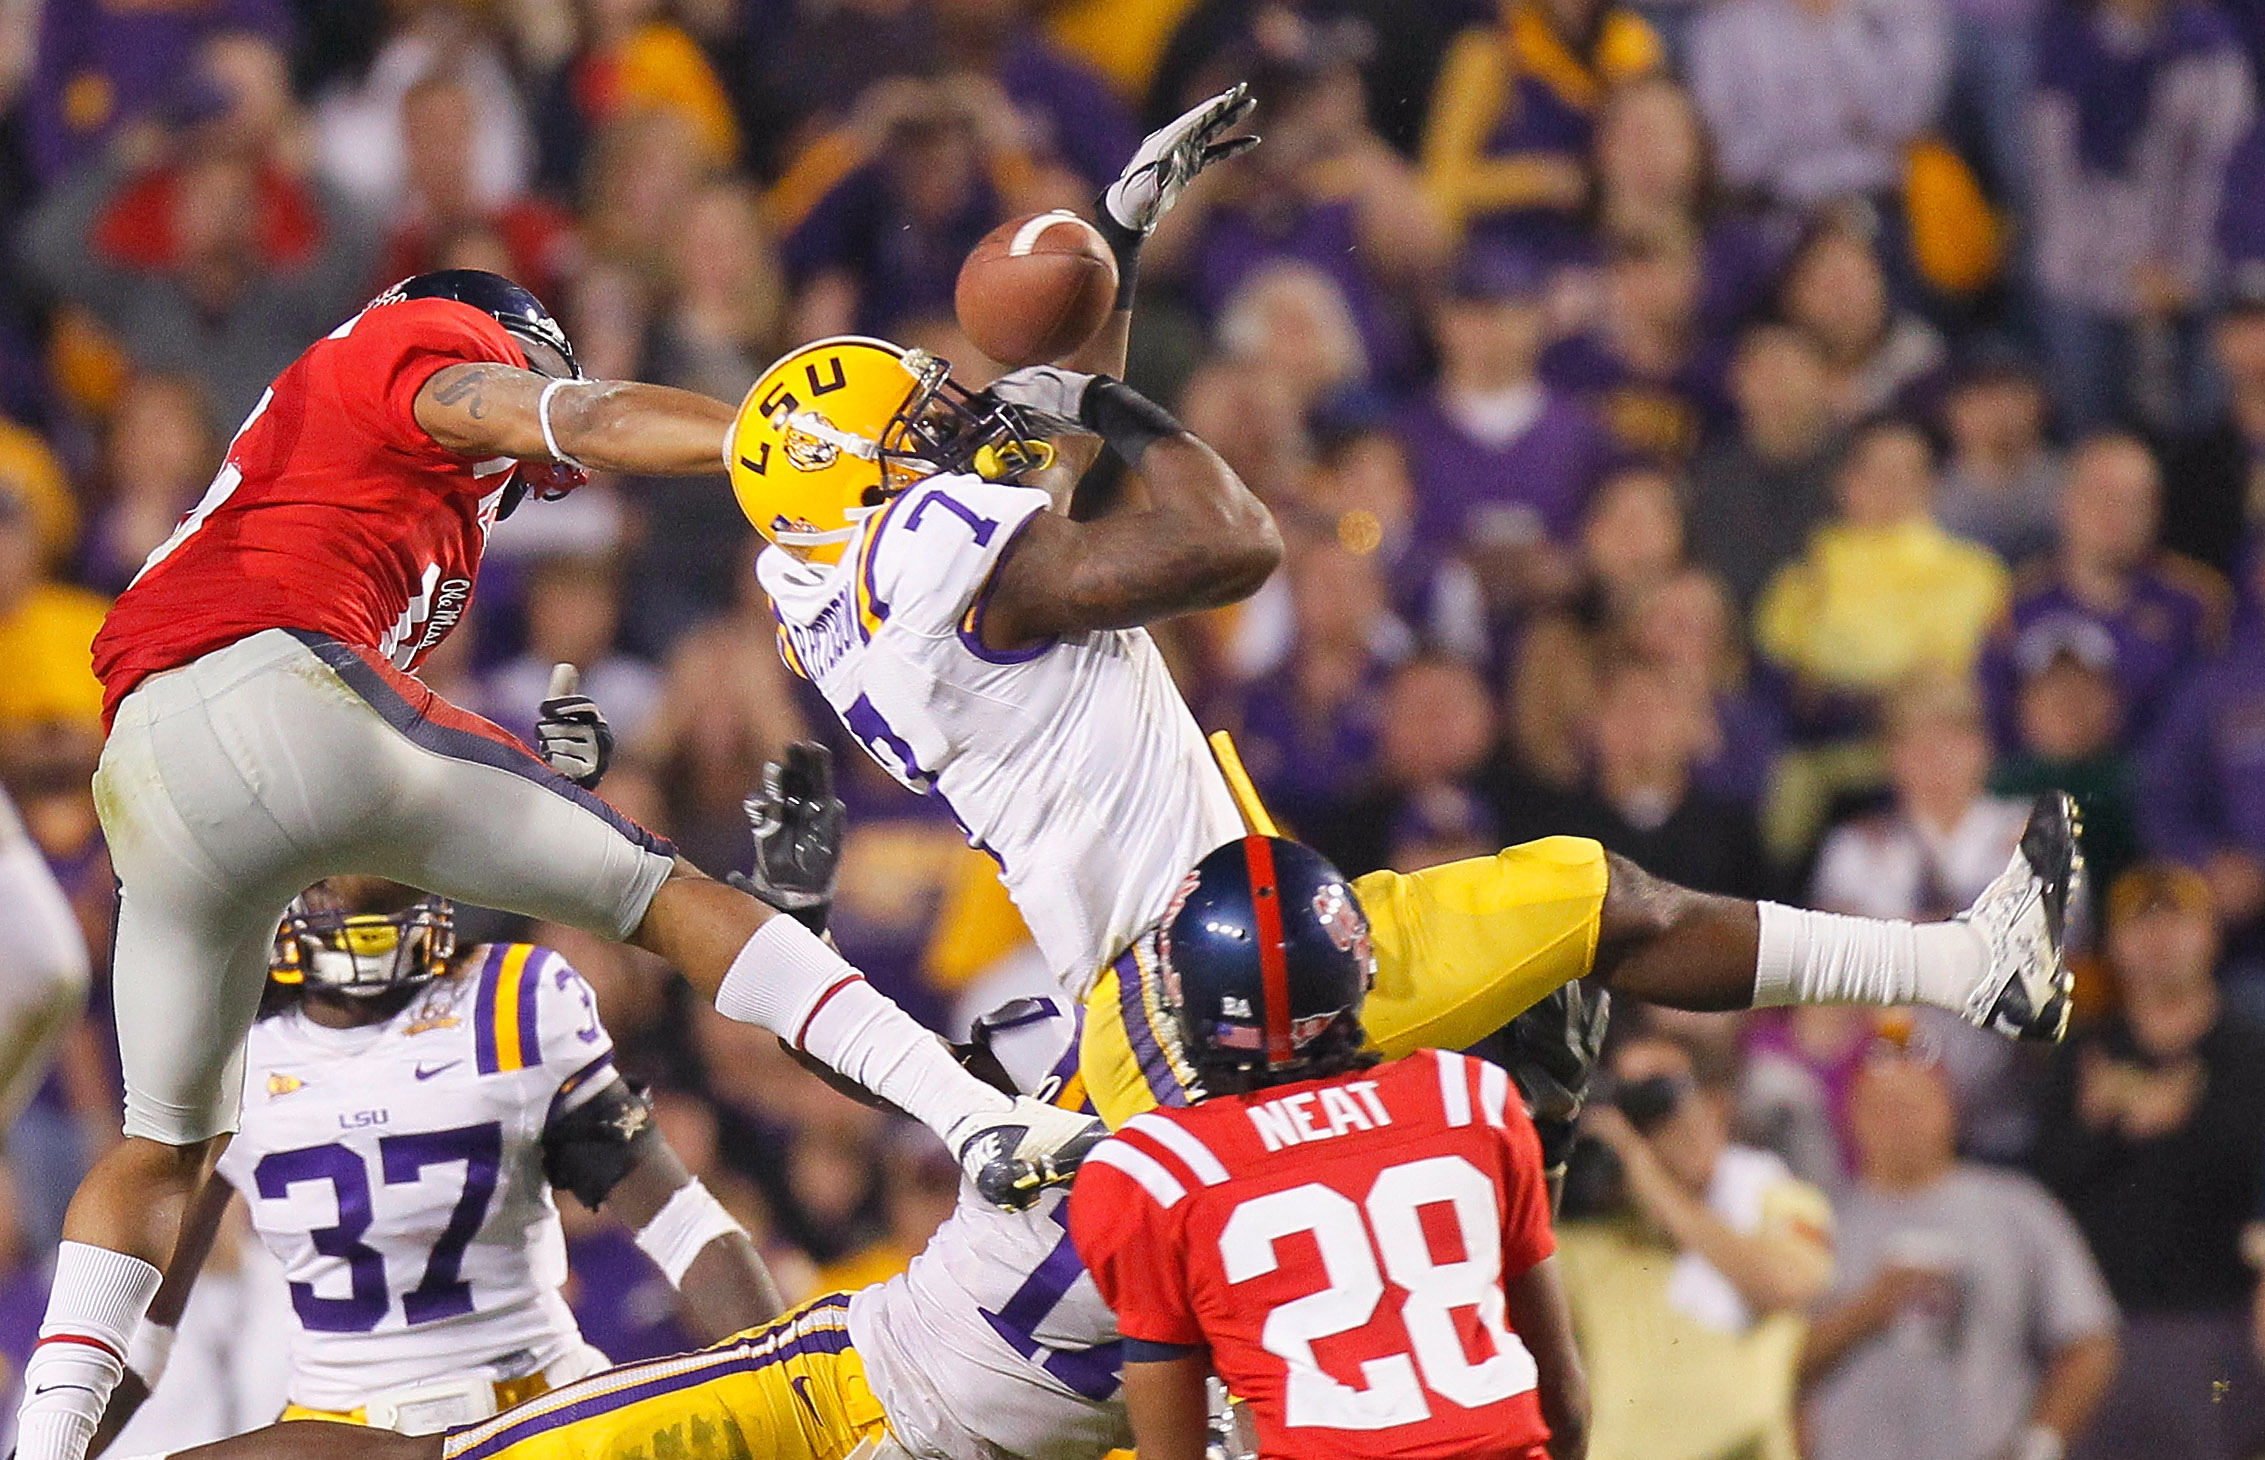 BATON ROUGE, LA - NOVEMBER 20:  Patrick Peterson #7 of the Louisiana State University Tigers nearly intercepts a pass in the final seconds against Markeith Summers #16 and Korvic Neat #28 of the Ole Miss Rebels as time expired at Tiger Stadium on November